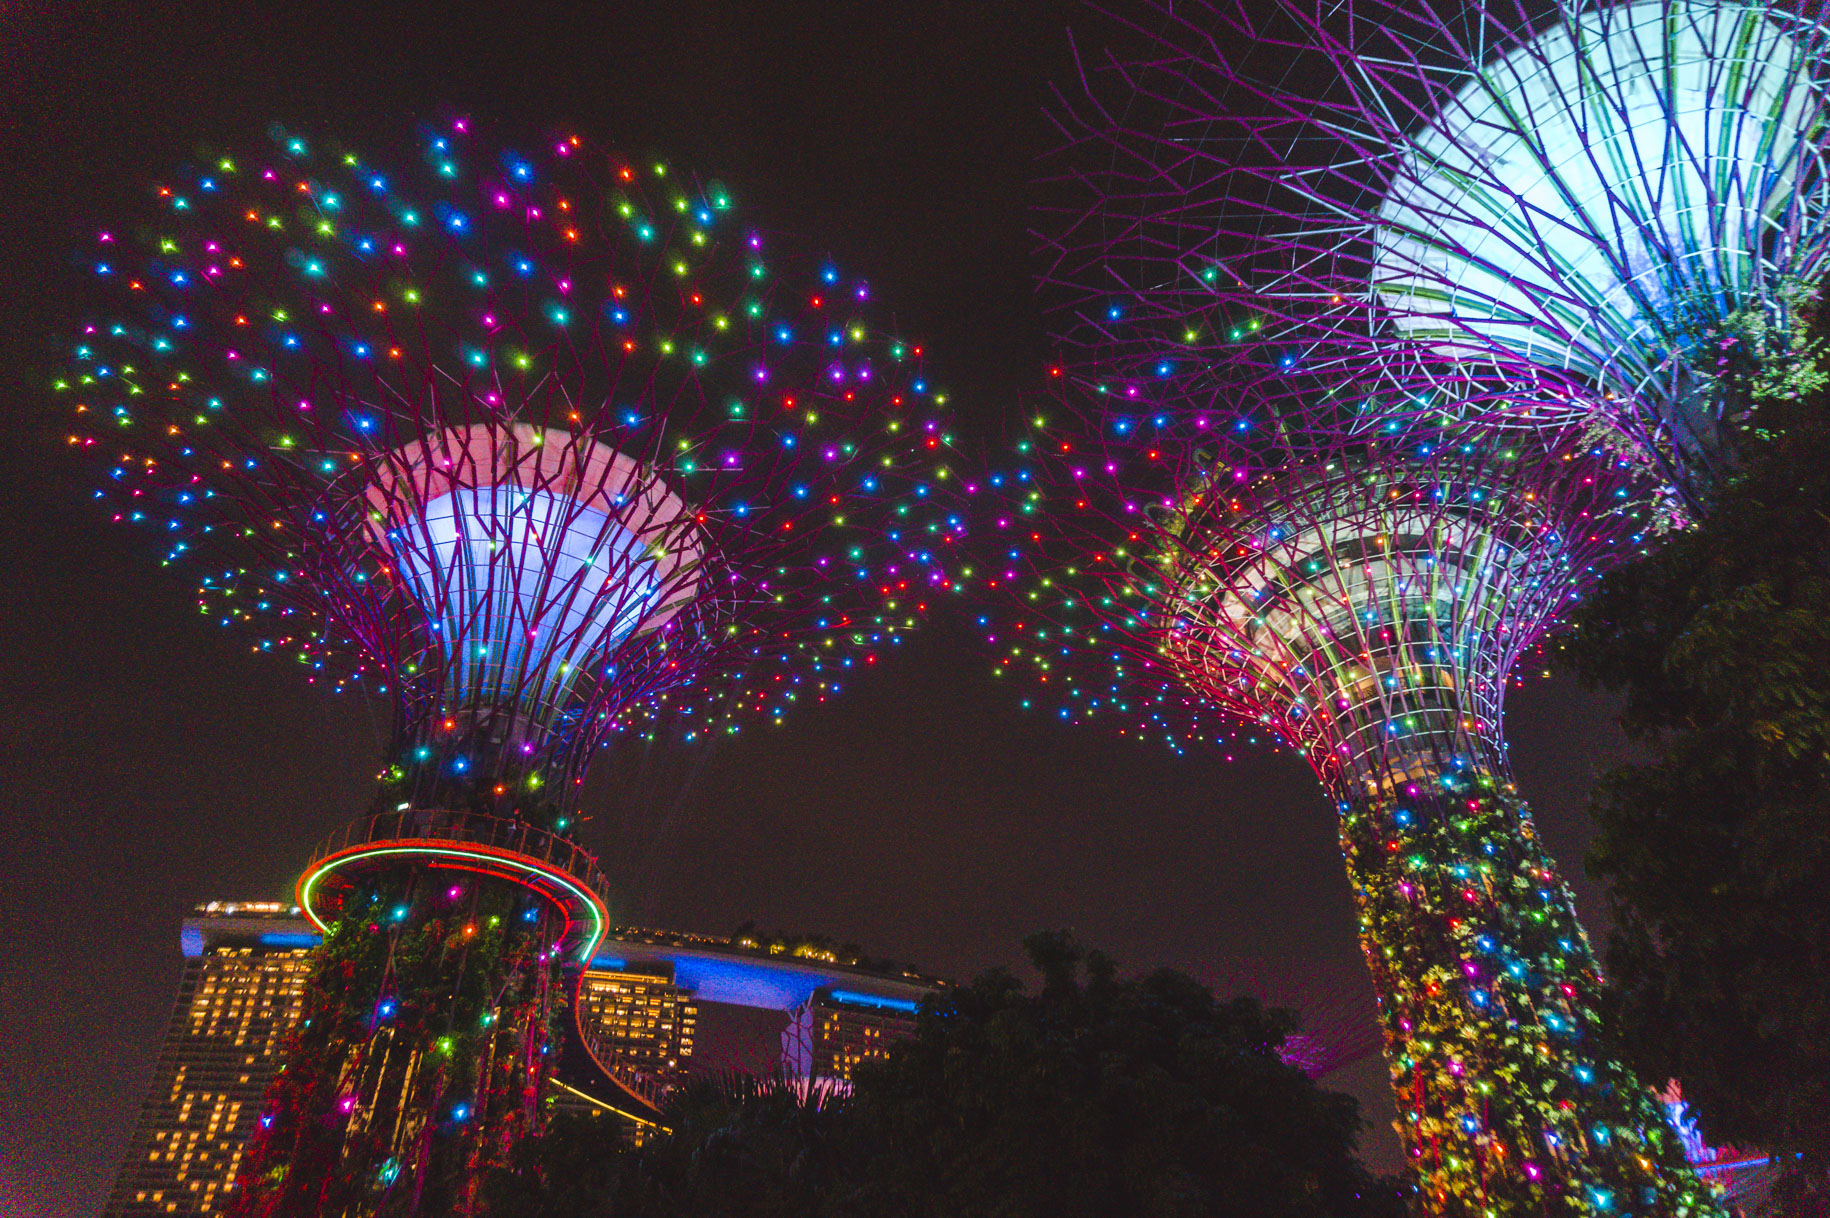 Singapore photos: Multi-coloured Supertree Grove at night in Gardens by the Bay is one of the best things to do in Singapore.